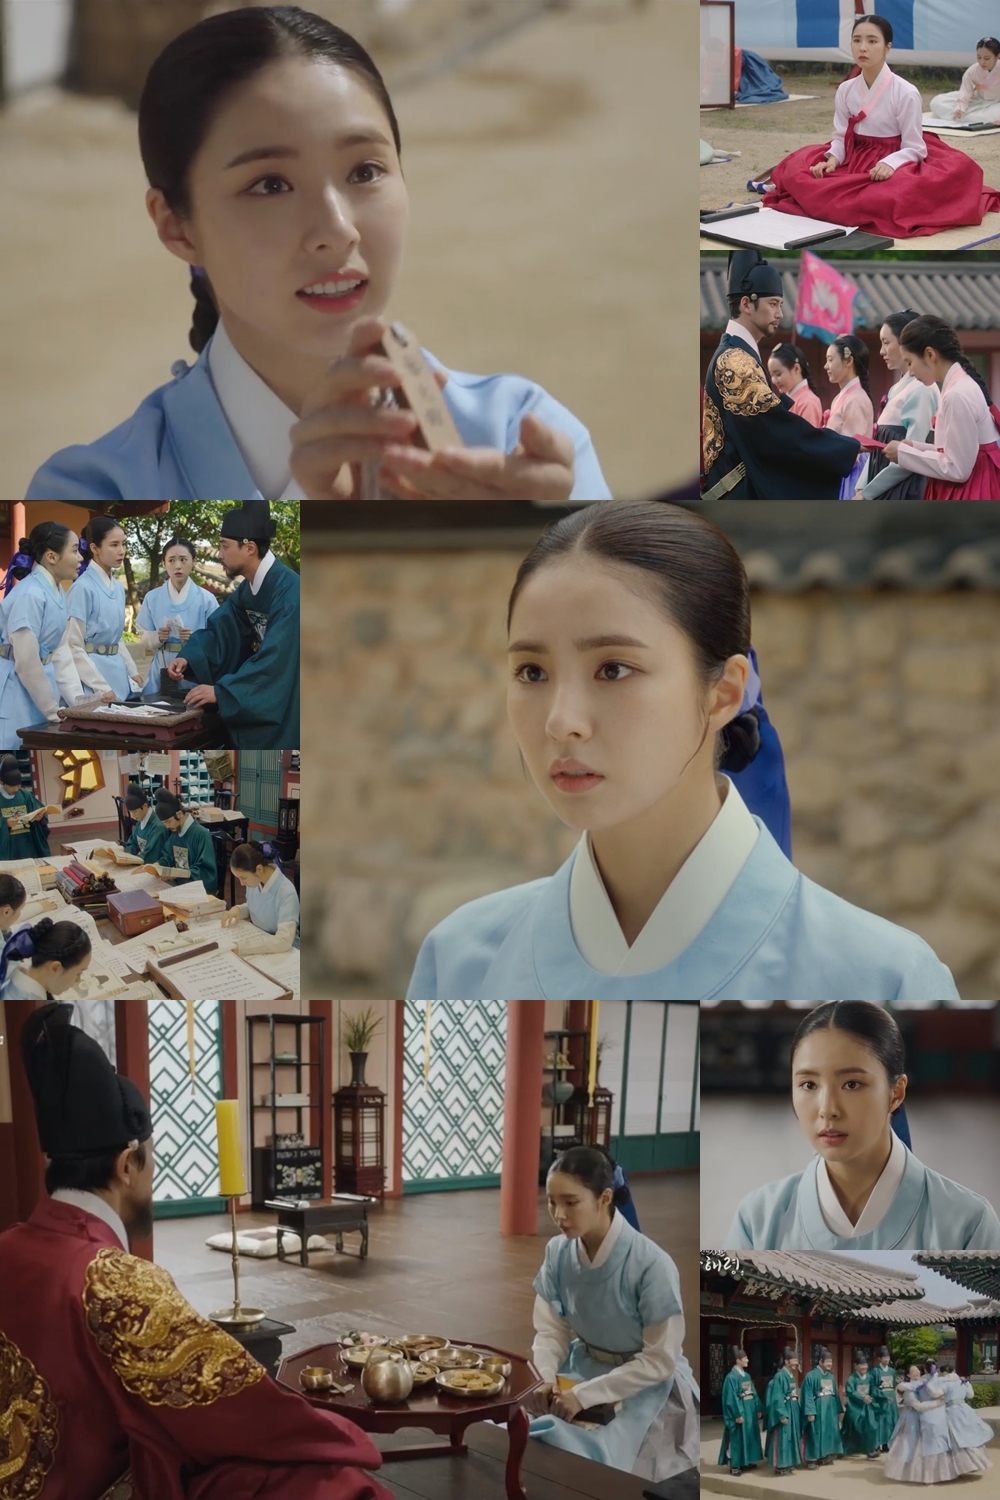 Shin Se-kyung, a new employee, is planting Kwon Kyung-won of change in the 19th century Joseon.She is a futile Ada Lovelace (), which has never been seen before, and has recounted her ambassadors and performances that collect topics every time.MBC drama Na Hae-ryung (played by Kim Ho-su / directed by Kang Il-su, Han Hyun-hee / produced by Green Snake Media) was the first problematic Ada Lovelace () of Joseon and the first film by Na Hae-ryung (Shin Se-kyung) and the reversal of Mo Tae-Solo, Prince Lee Rim (played by Jung Eun-woo) The full romance annals.Park Ki-woong, Lee Ji-hoon, Park Ji-hyun and other young actors, Kim Ji-jin, Kim Min-Sang, Choi Deok-moon, and Sung Ji-ru.The new employee, Na Hae-ryung, creates various changes based on his ingenious imagination and presents a new paradigm of historical drama.In particular, Shin Se-kyung plays the role of problematic Ada Lovelace in the 19th century Joseon, and is loved by many as a dignified female character who does not lose his subjectivity even in the times when various discrimination was prevalent.I looked back on her brilliant performance, which is receiving the attention of viewers across work and love.First Kwon Kyung-won! The daring point to Park Ki-woongs wrong tense! Entering the precept as Ada Lovelace!Na Hae-ryung held the Ada Lovelace starlet with her wedding behind her.In the star market, Na Hae-ryung wrote his thoughts, saying, People can not stop the sky, with the tense What should the king do to prevent the Japanese eclipse?Lee Jin (Park Ki-woong), who saw the rugged municipality of Na Hae-ryung, asked Na Hae-ryung, Do you think my tense is wrong? Na Hae-ryung pointed out Lee Jins tense, saying, If you think that there is a way to prevent the eclipse, it is wrong.In the strict Joseon Dynasty, Na Hae-ryung did not even give his will to the crown prince.Na Hae-ryung announced the birth of an independent female character with a daringness that she said was wrong to think she was wrong.Na Hae-ryung, who became Ada Lovelace and entered the courtroom, continued another activity.Second Kwon Kyung-won! Gwangheungchang Corruption Appeal X Epithelial Disruption Point! Courage to Baro-catch the wrongs!Na Hae-ryung, who became Ada Lovelace, visited Gwangheungchang, a government office that distributes greenbelts to receive the first greenbelt (todays salary).Na Hae-ryung, who witnessed the corruption of Gwangheungchang with his eyes, appealed and was accused of being a poor bitch.But Na Hae-ryung responded, I saw a negative figure, and I wrote an appeal to Baro, and said that he did only what he had to do as a manager.In particular, Na Hae-ryung said, I want to know what I did wrong, Baro, and I want to get rid of it.Na Hae-ryung then took on all the work that increased due to the strike of angry frosts and took responsibility for his actions.In addition, Na Hae-ryung found the epithelials during his examination of the appearance.This caused the impeachment of Min Woo-won (Lee Ji-hoon) by touching the planting of Lee Cho Jeong-rang and Song (Ryu Tae-ho), and Na Hae-ryung caught the heart of Woo-won, who was shaken with heartfelt consolation.As such, the courage of Na Hae-ryung, who wants to catch the mistake as Ada Lovelace, and the responsibility of it have inspired the viewers.The third Kwon Kyung-won! Dori, who was guarded as a big deal! against the king!Na Hae-ryung showed a daringness even in front of the current King Hamyoung-gun Lee Tae (Kim Min-Sang).Na Hae-ryung, who was discovered after listening to the conversation between Ham Young-gun and the left-wing Min-yuk-pyeong (Choi Deok-moon), endured the bullying of Ham Young-gun and eventually came to a self-righteous monologue with him.Na Hae-ryung dared to ask Ham Young-gun, who was willing to do anything if he erased the contents of his remorse, and conveyed the role and reason of the officer and obtained a notice that Ham Young-gun would not interfere with the officers work again.As such, Na Hae-ryung not only kept the duty of the officer, but also expanded his position as a officer and made them proud of those who grew up one step further.As such, Na Hae-ryung is bringing out the immersion of viewers with the famous ambassadors and scenes that cause empathy every time.The Kwon Kyung-won of Change, which Na Hae-ryung, who is growing up as a dignified Ada Lovelace, gives a great resonance to the modern society of the 21st century as well as the 19th century Joseon, which is the background of the play.Na Hae-ryungs words and actions have become a Kwon Kyung-won and are blooming small changes in the 19th century Joseon.I am grateful to the viewers who deeply sympathize with Na Hae-ryung and support him. As the new second act is held, more exciting stories will be visited.I would like to ask for your expectation of what kind of Kwon Kyung-won will be planted in the future. Shin Se-kyung, Jung Eun-woo and Park Ki-woong will appear on the 28th at 8:55 pm on Wednesday night, 25-26 times.iMBC  Photos